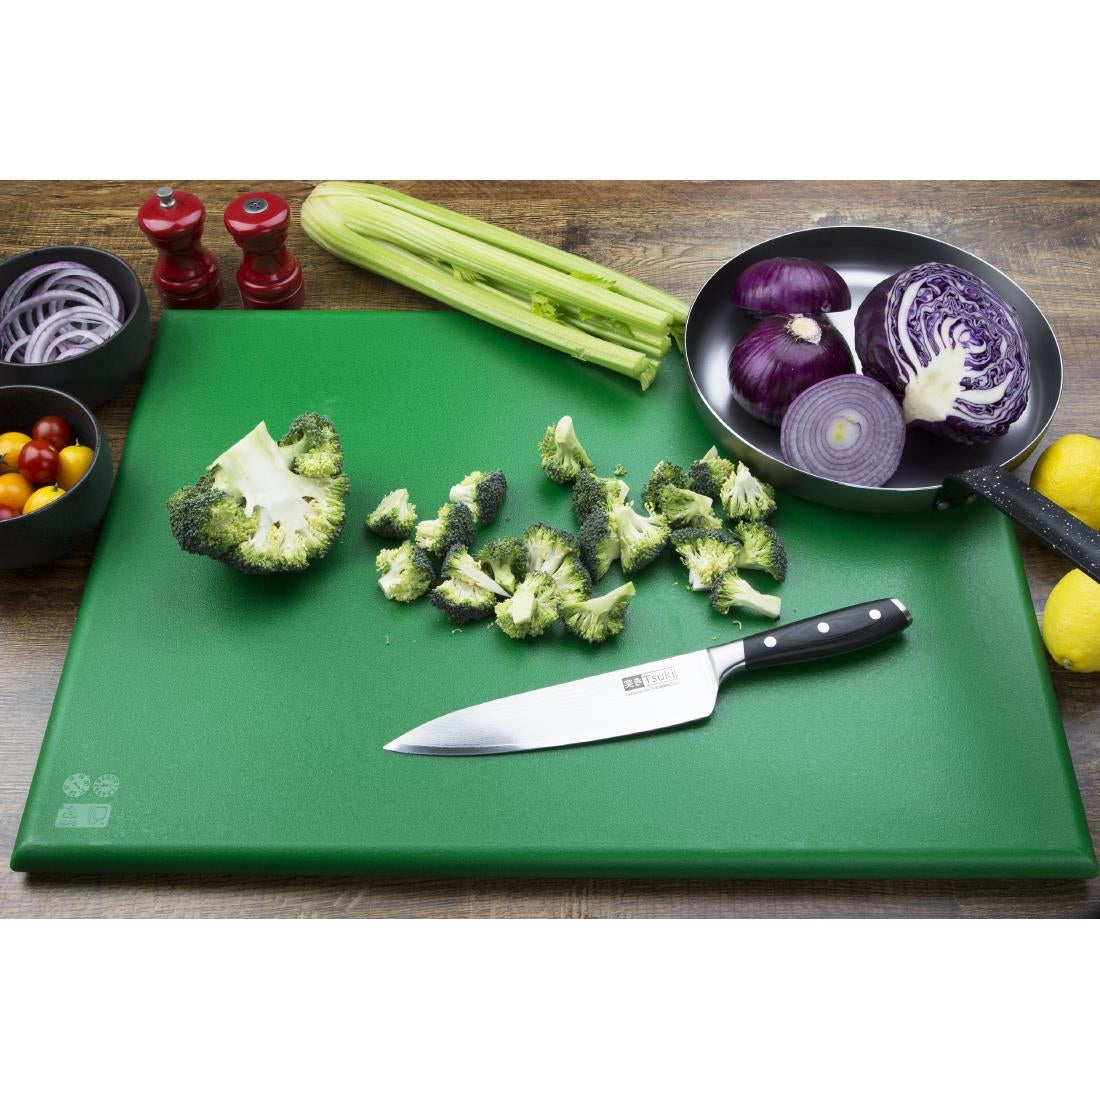 Hygiplas Extra Thick High Density Green Chopping Board Large JD Catering Equipment Solutions Ltd